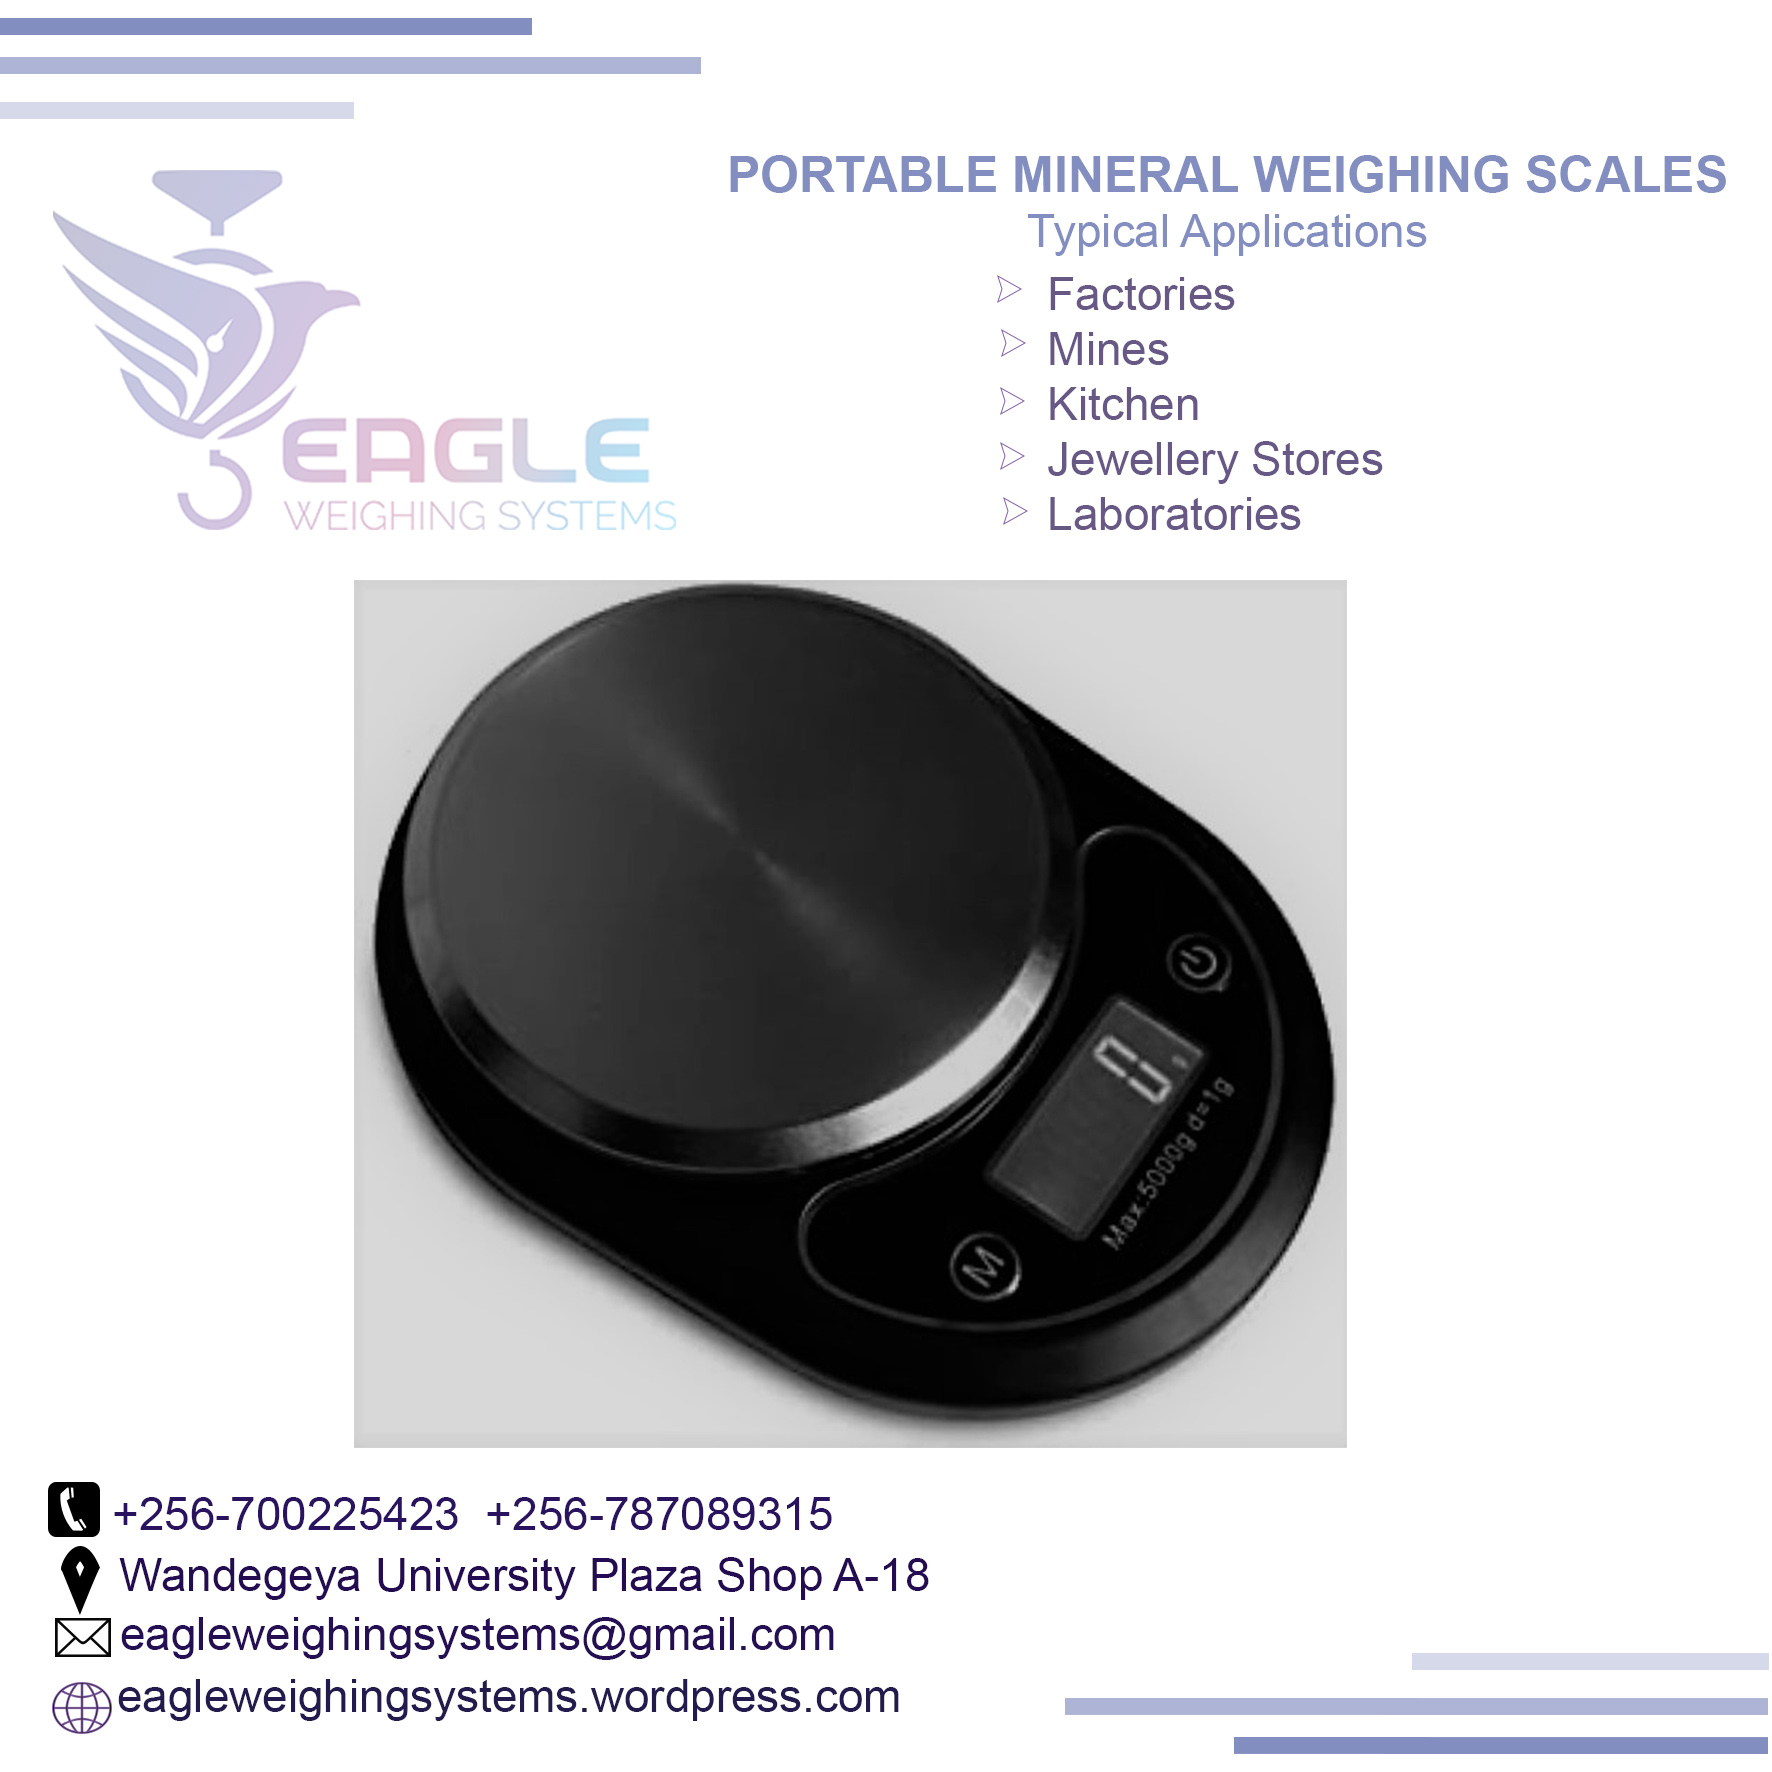 Portable mineral, jewelry digital electronic weighing scales in Kampala Uganda, Kampala Central Division, Central, Uganda